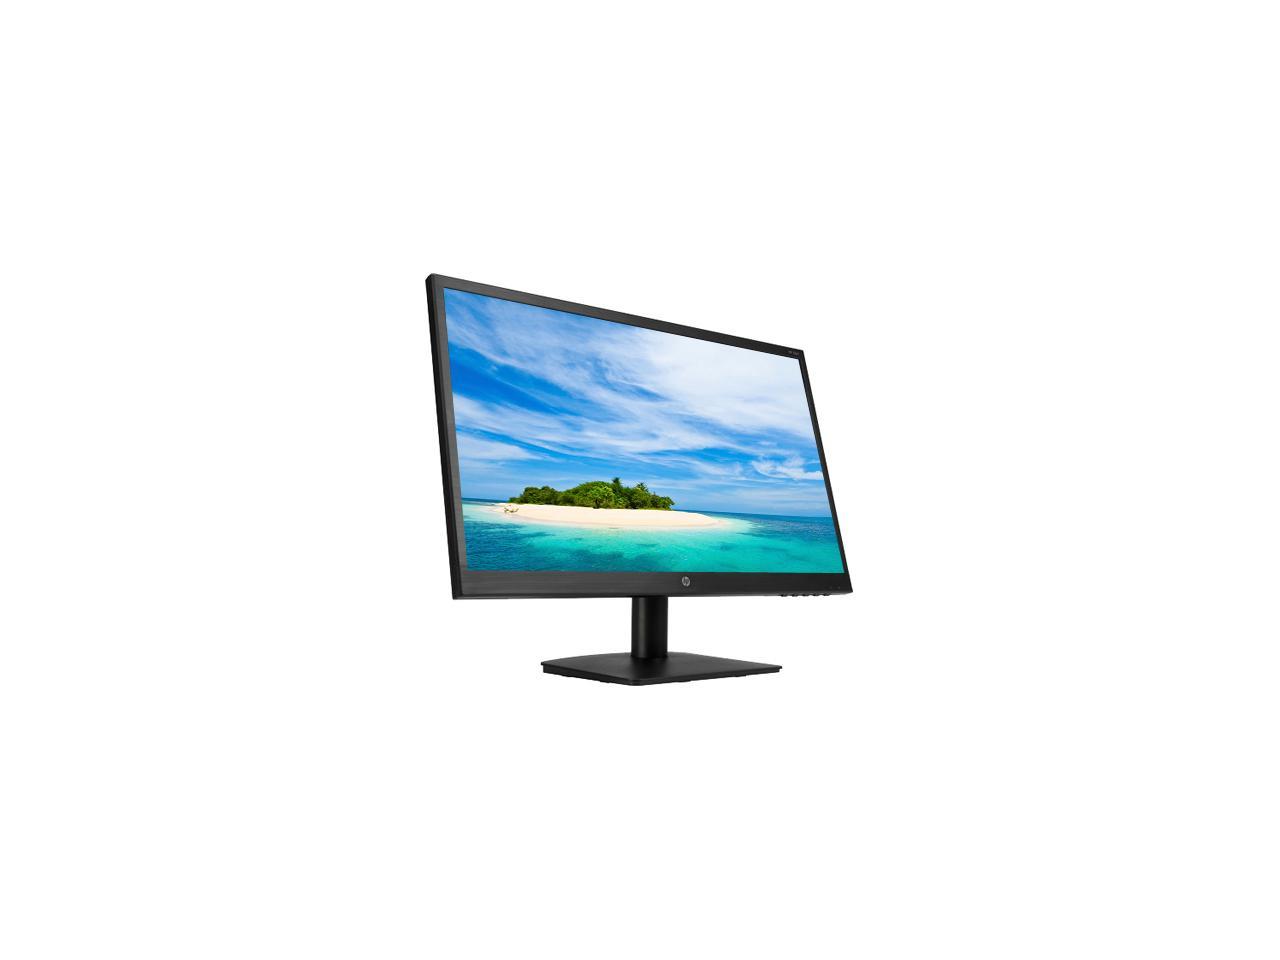 HP 22YH 22" (Actual Size 21.5") Full HD 1920 x 1080 5ms (GTG) VGA HDMI HDCP Support Anti-Glare Backlit LED Monitor